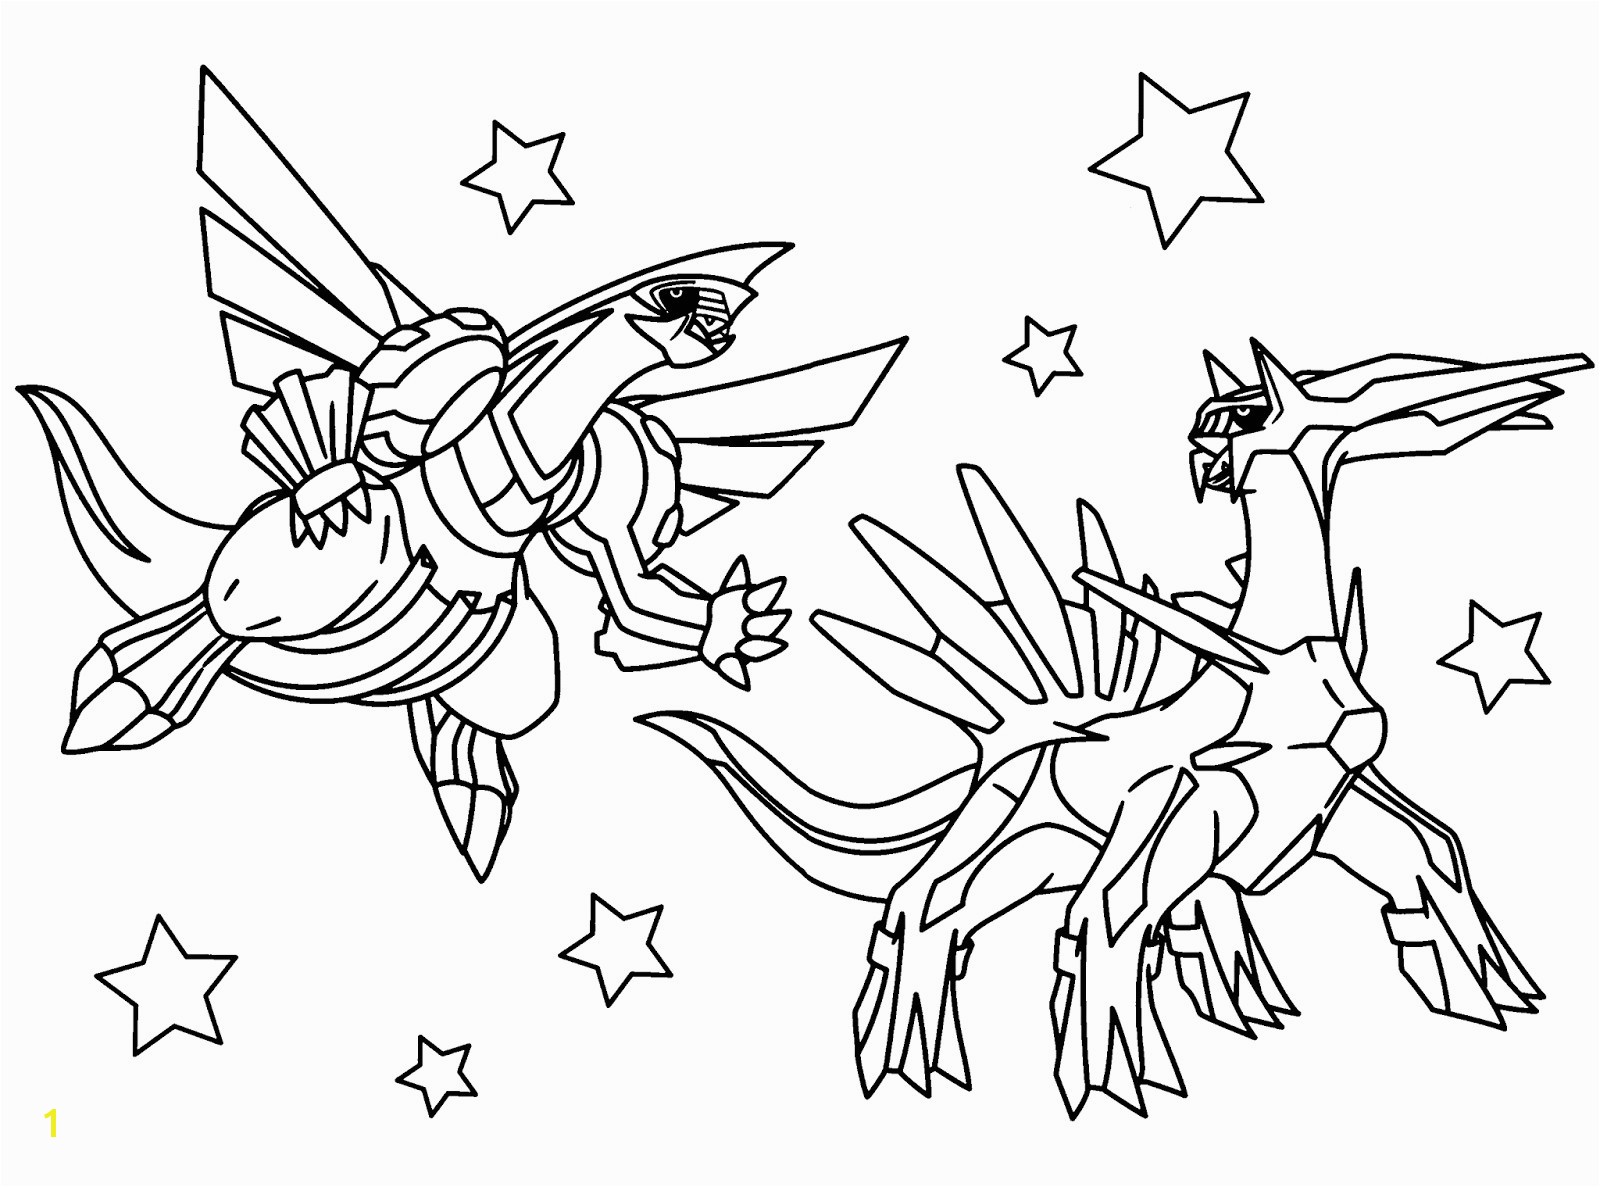 Awesome Pokemon Mega Coloring Pages Collection 3 p Legendary Pokemon Coloring Pages Mega Rayquaza